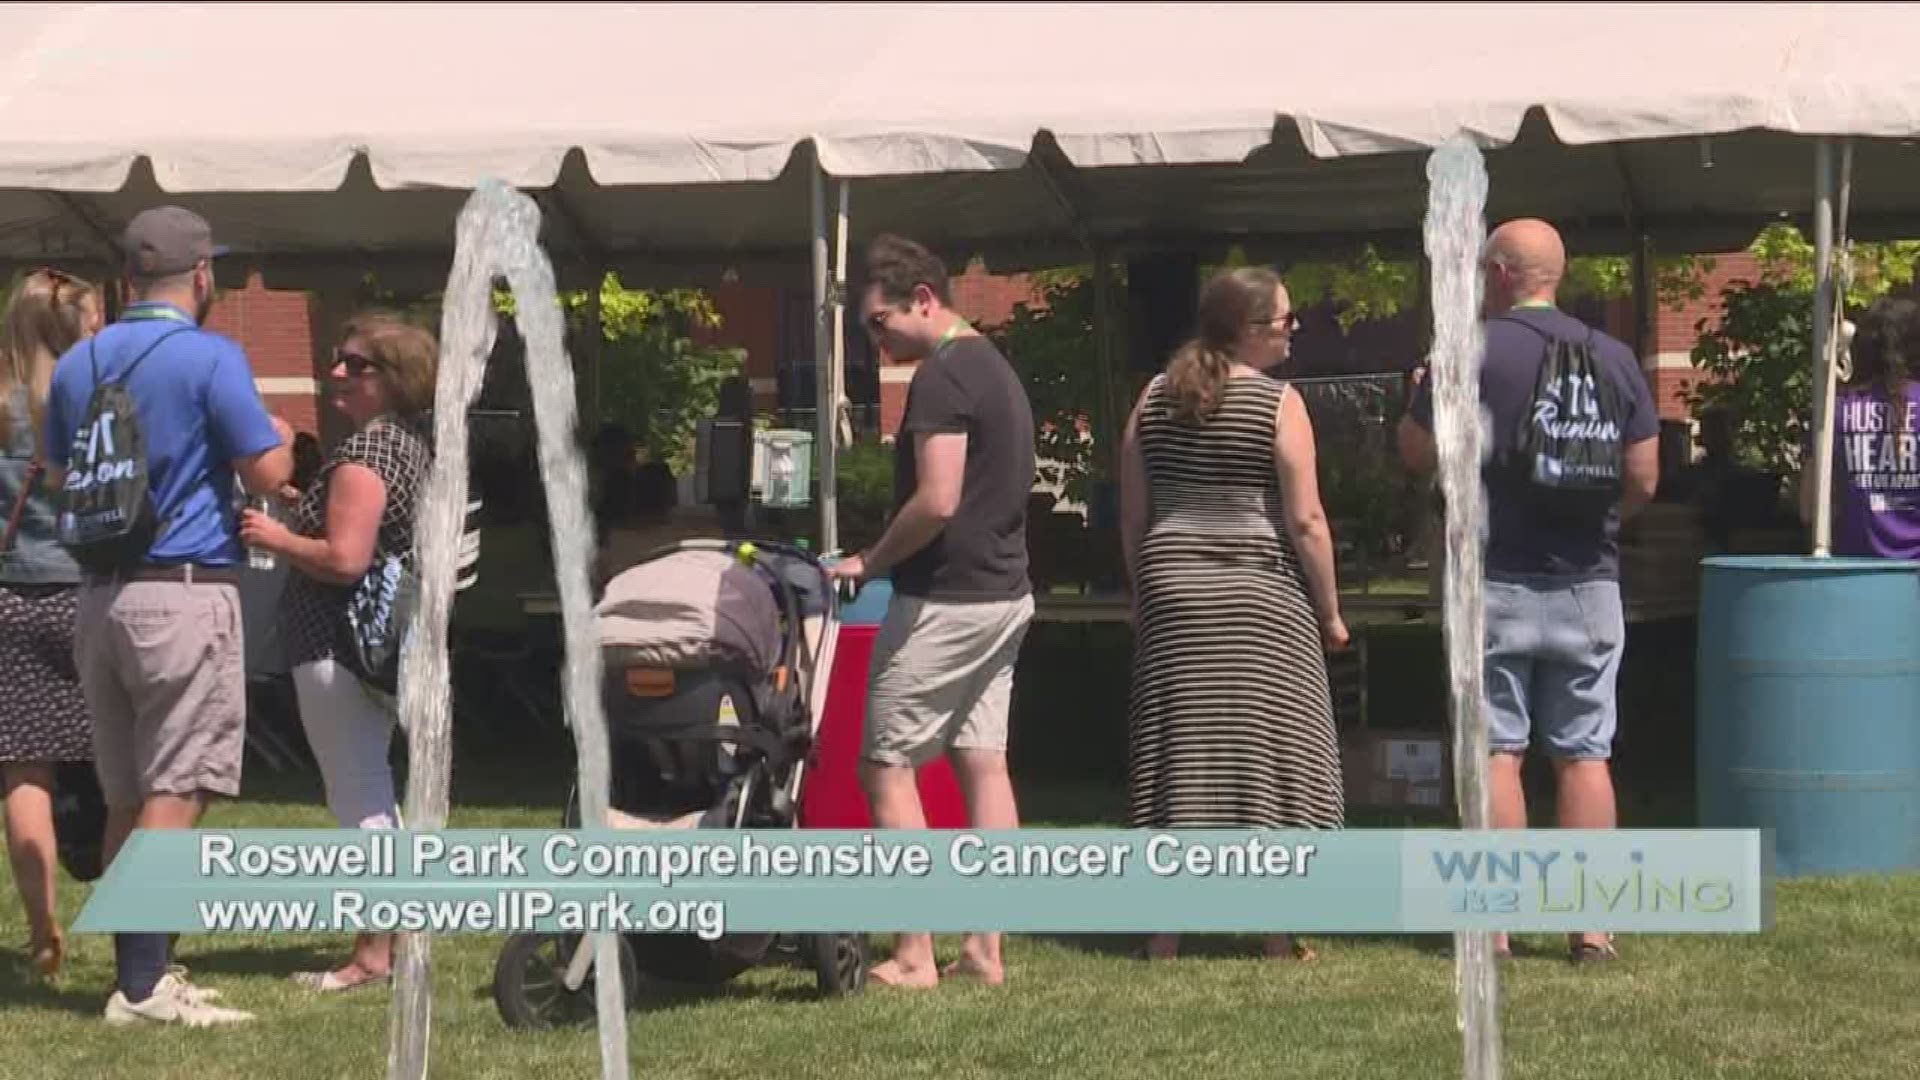 August 24 - Roswell Park Comprehensive Cancer Center